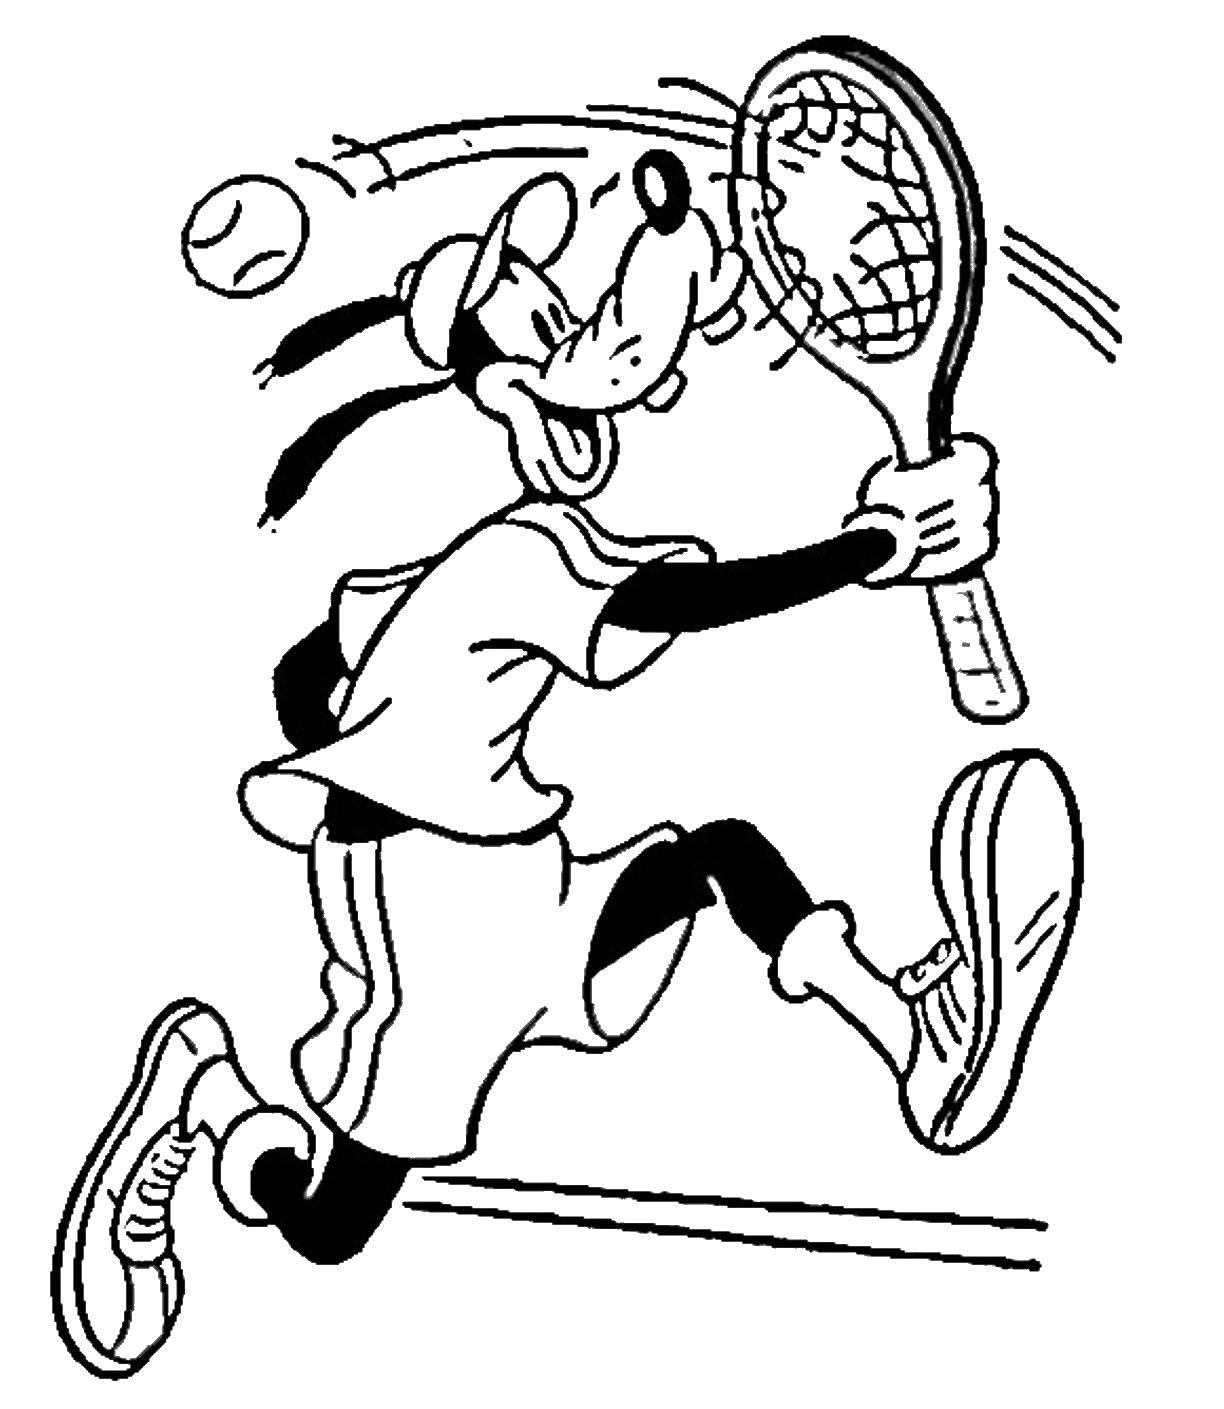 Coloring Tennis. Category Sports. Tags:  sports, tennis, dog.